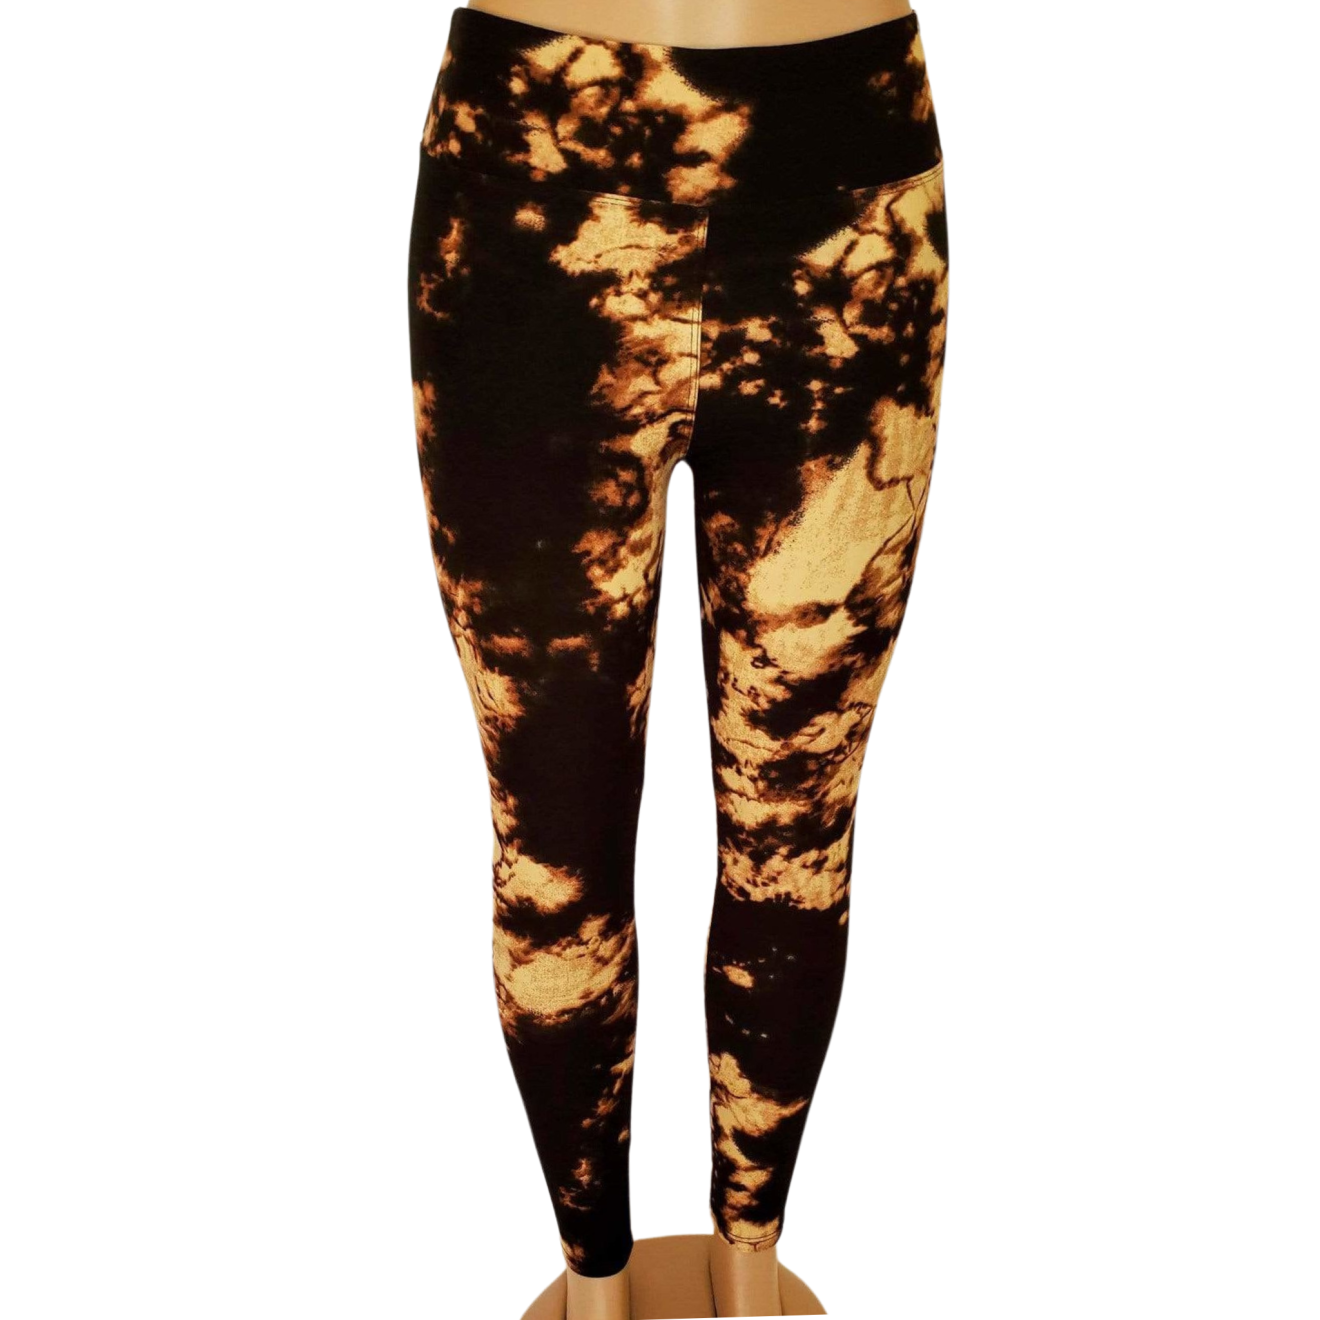 A pair of high waist tie dye yoga pants in black and brown. Perfect for fitness, yoga, and casual wear.